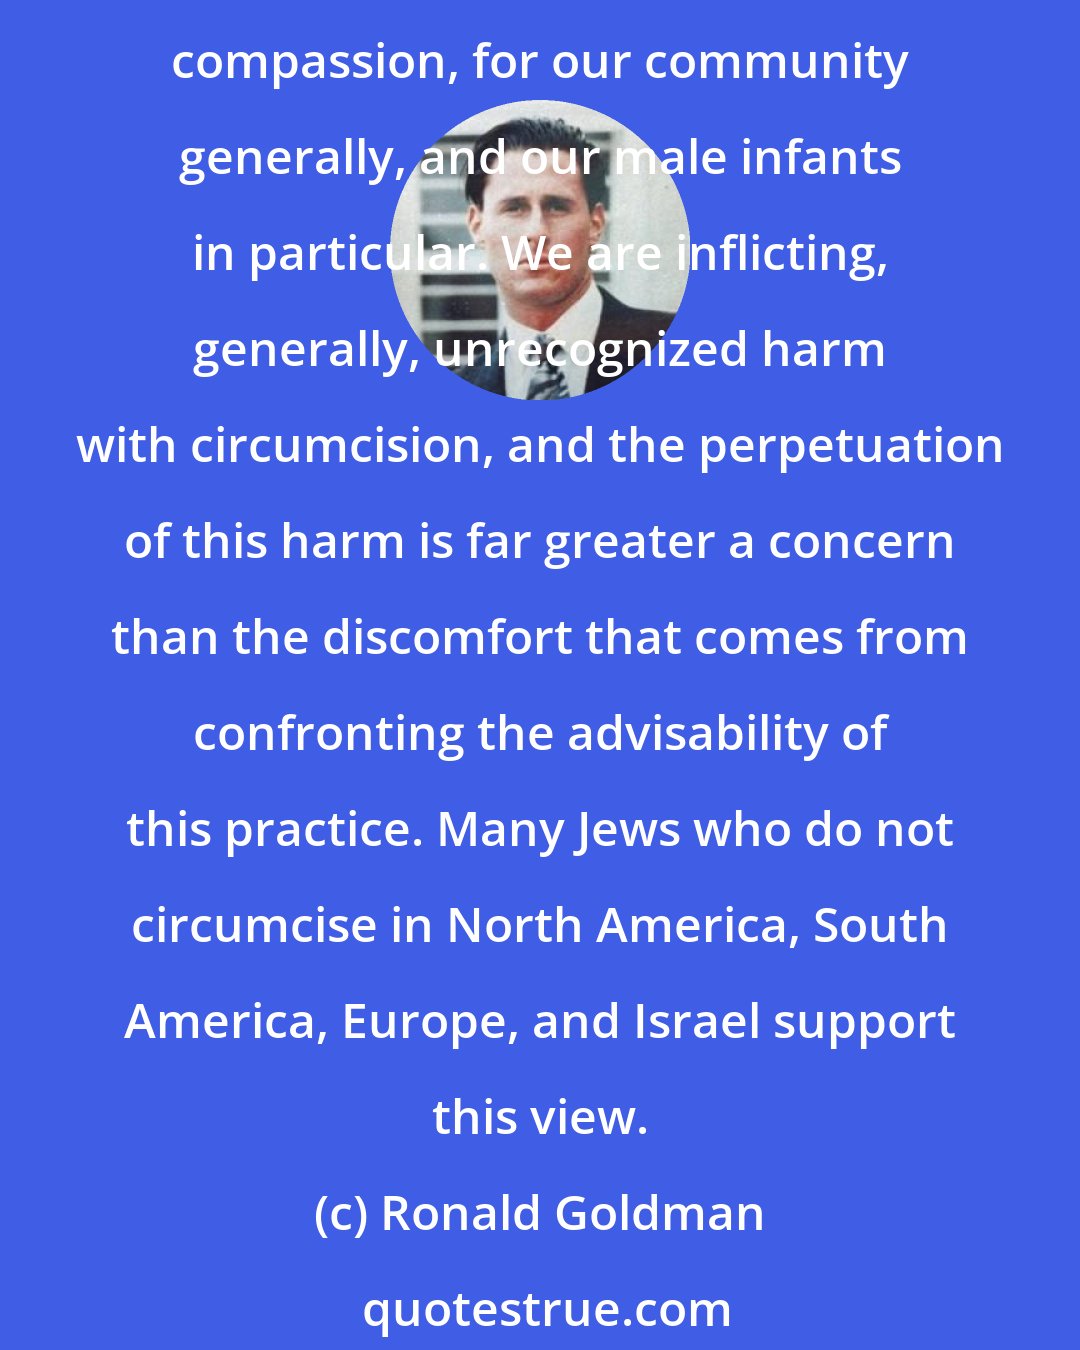 Ronald Goldman: As a Jew and a psychologist, I understand the stress that religious communities feel in connection with questioning of circumcision... I raise these questions out of deep caring and compassion, for our community generally, and our male infants in particular. We are inflicting, generally, unrecognized harm with circumcision, and the perpetuation of this harm is far greater a concern than the discomfort that comes from confronting the advisability of this practice. Many Jews who do not circumcise in North America, South America, Europe, and Israel support this view.